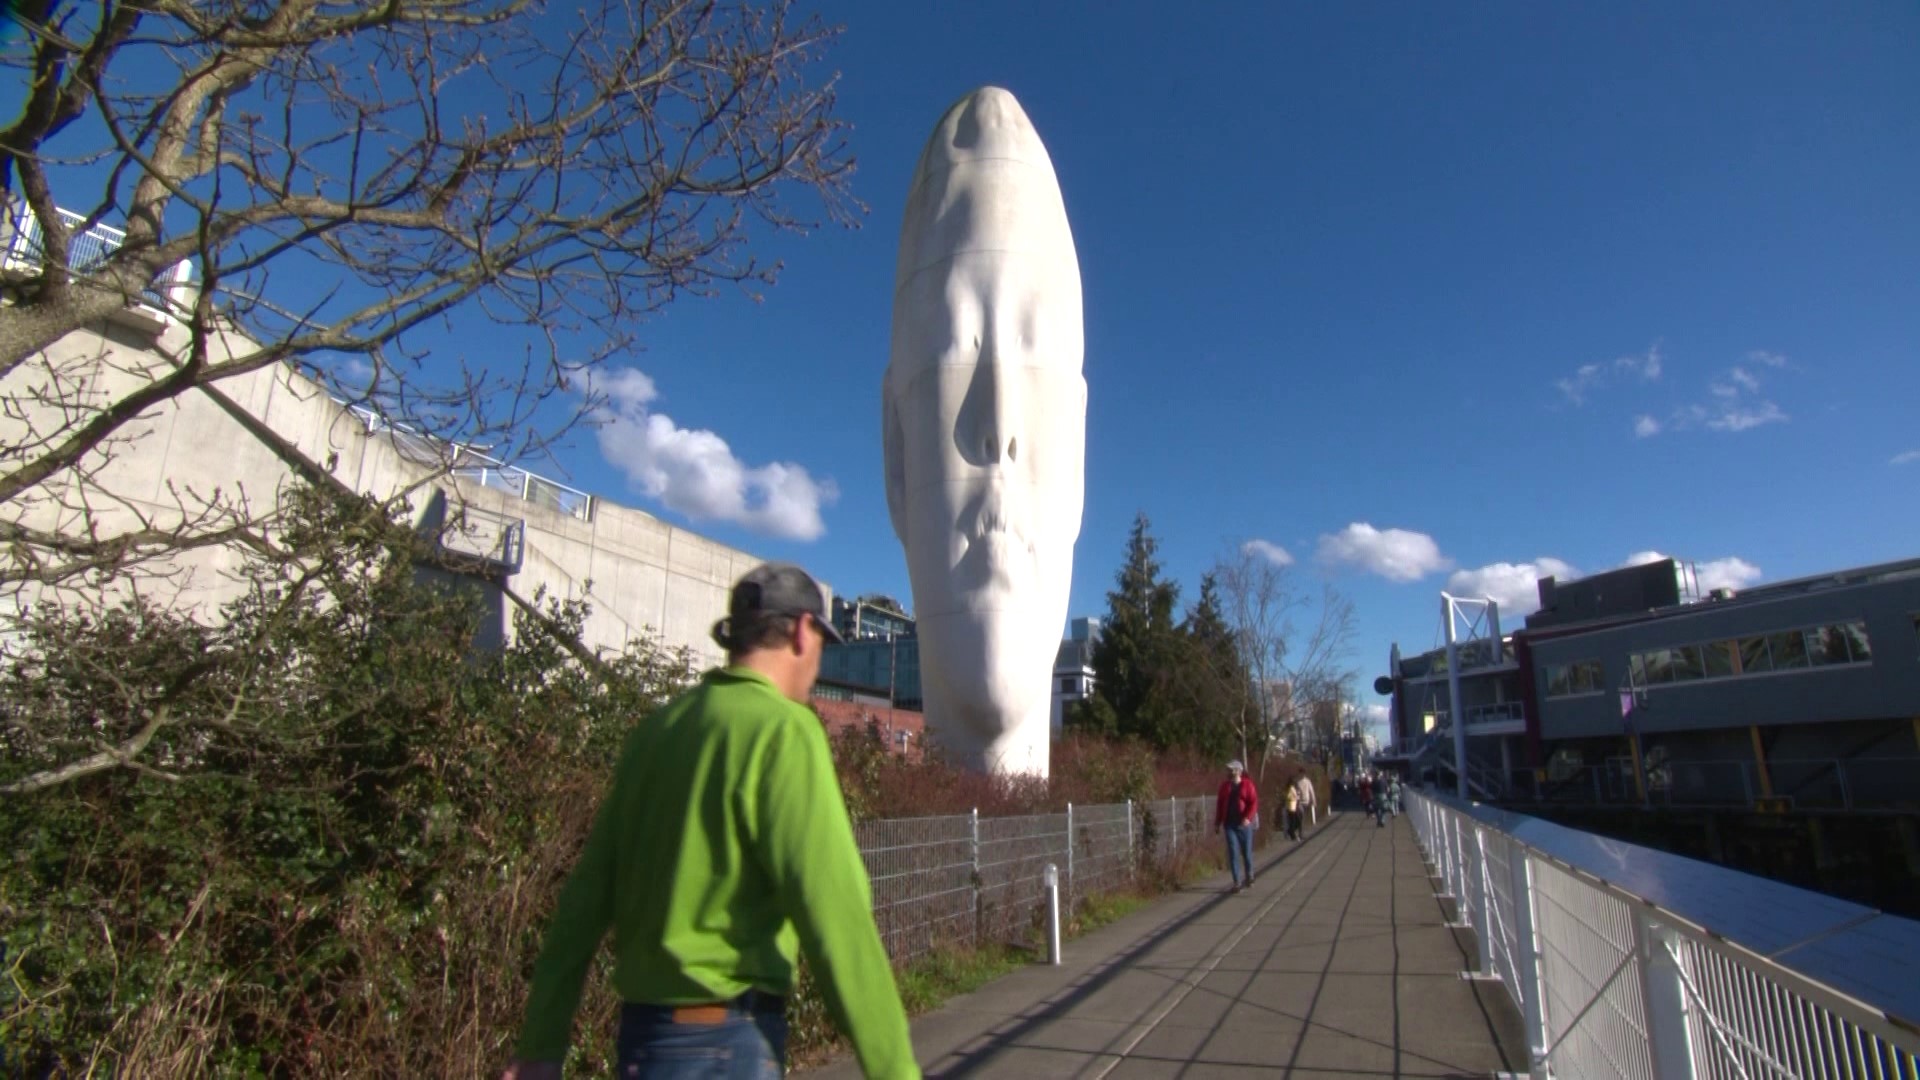 Moments of serenity from Seattle's Olympic Sculpture Park on a sunny day. #k5evening